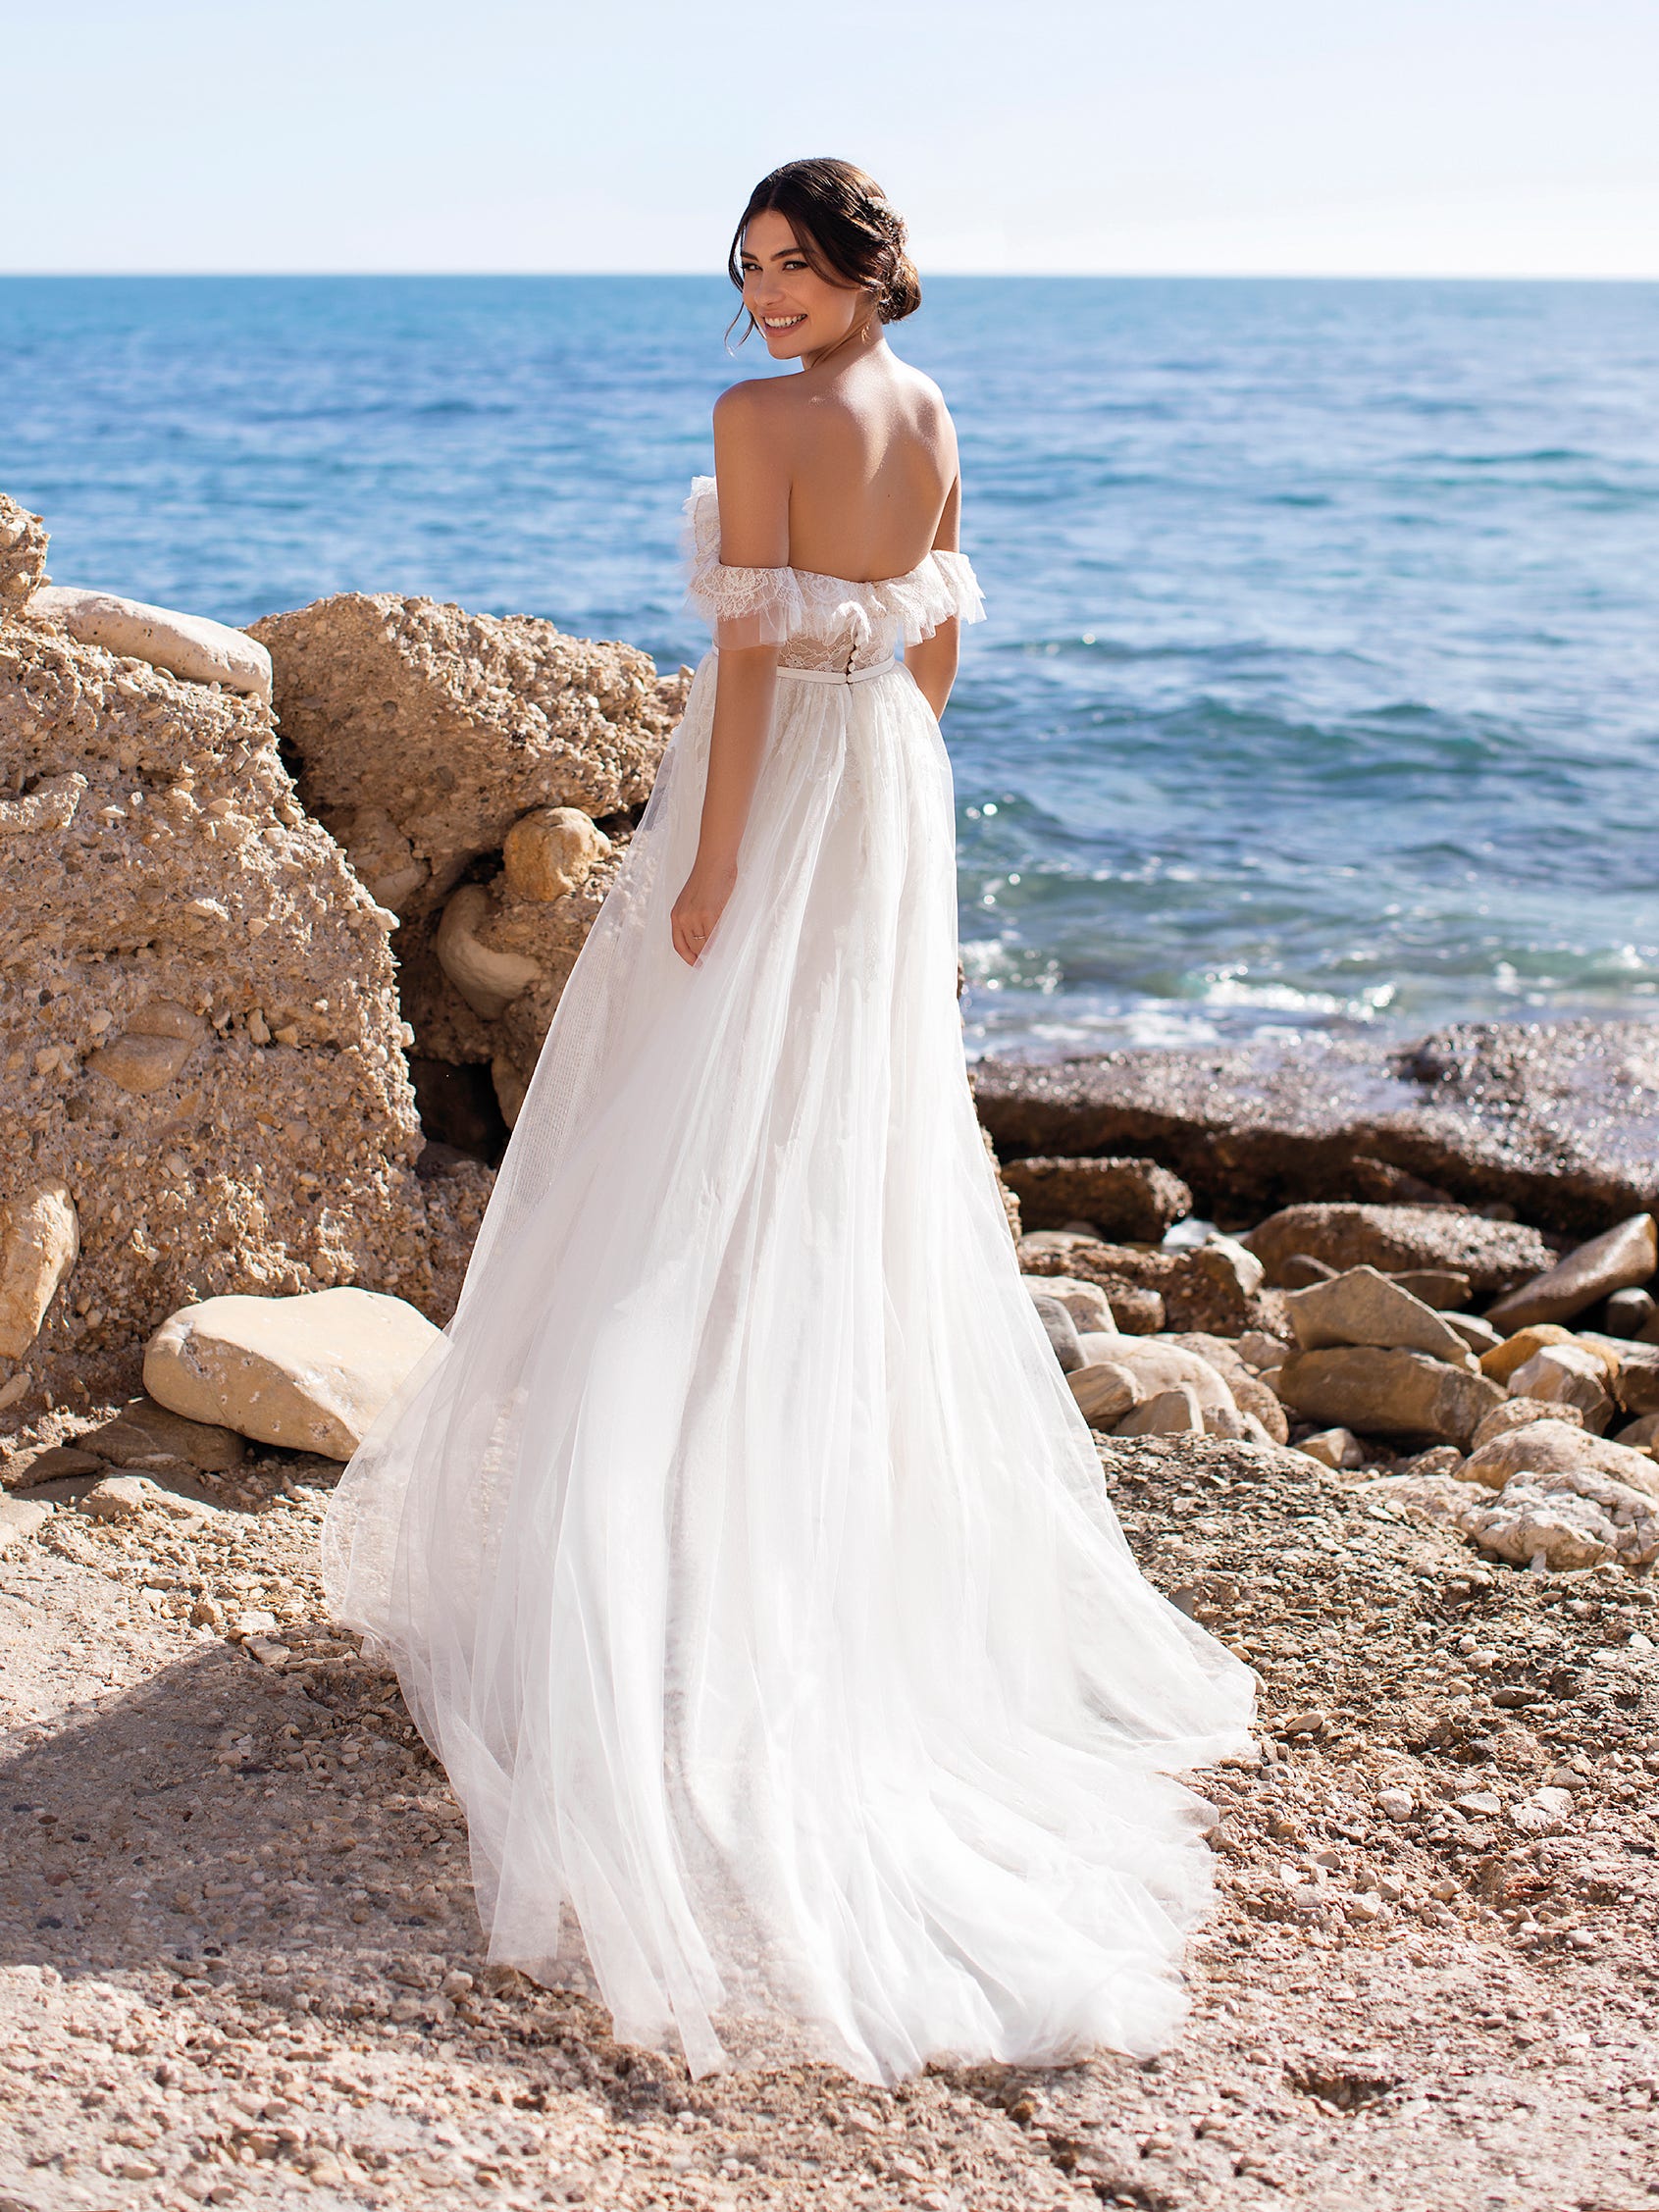 How To Dress For A Beach Wedding